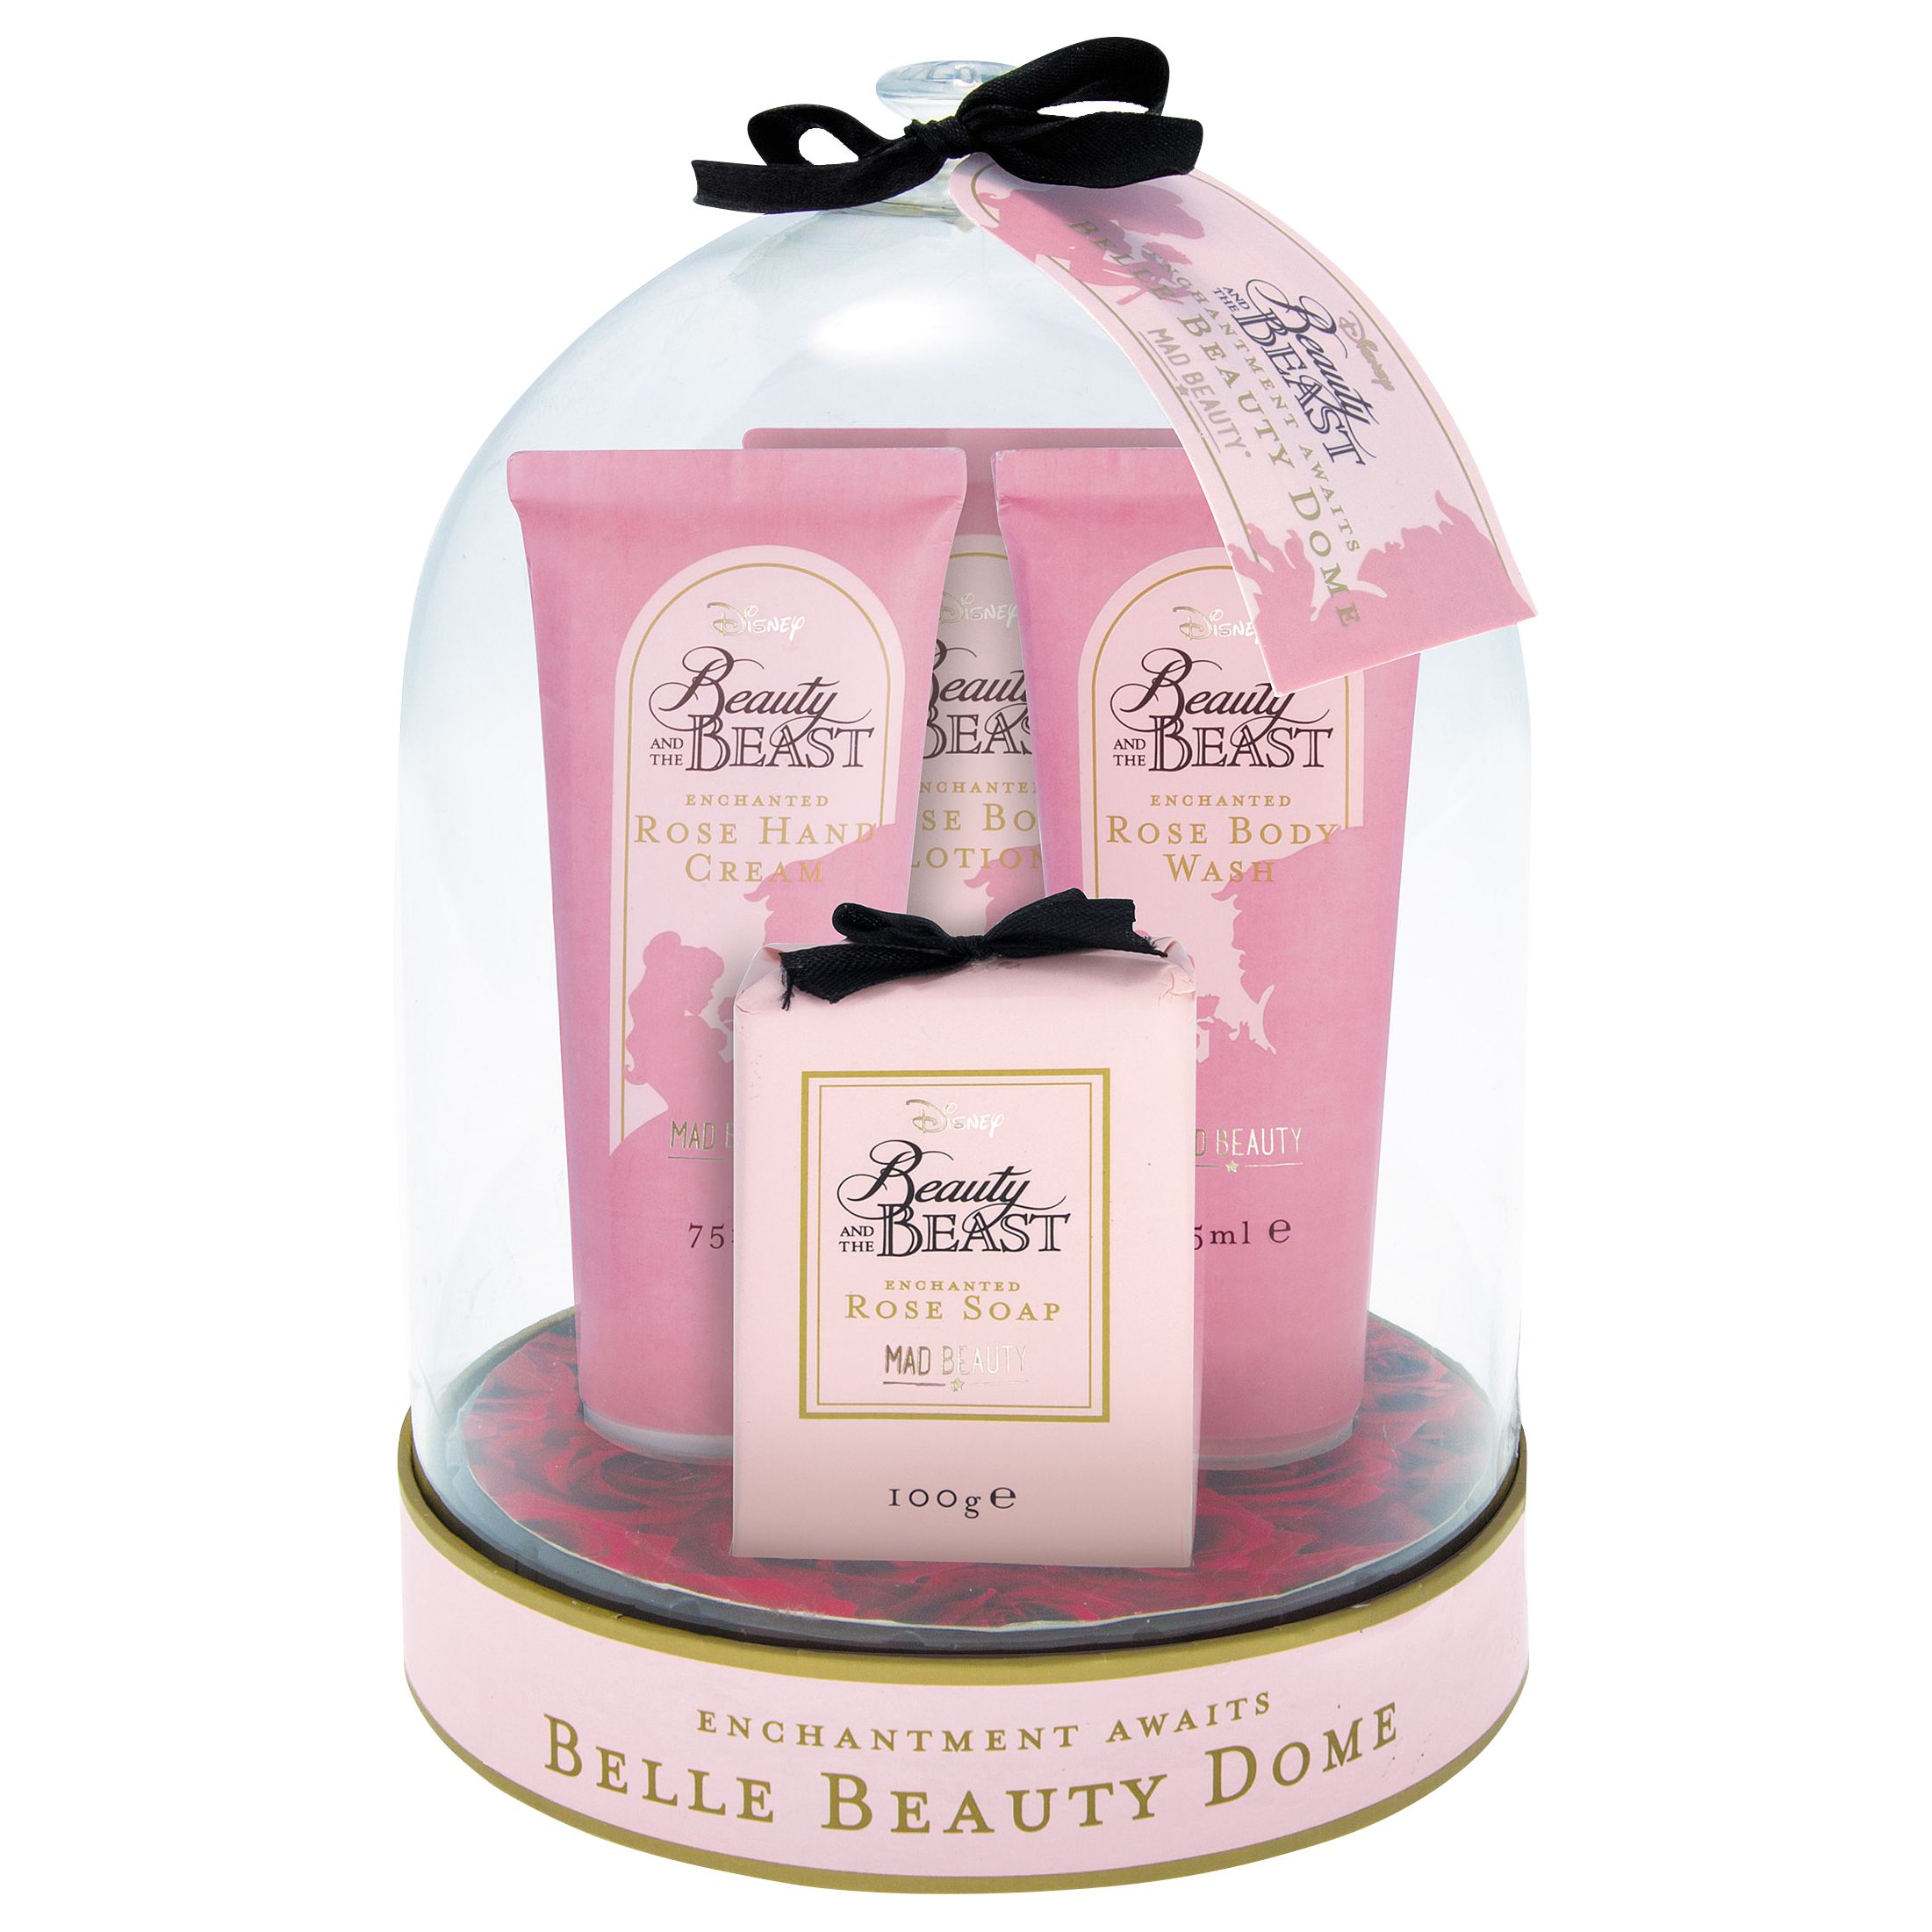 Mad Beauty Belle Beauty And The Beast Dome Bath Gift Set